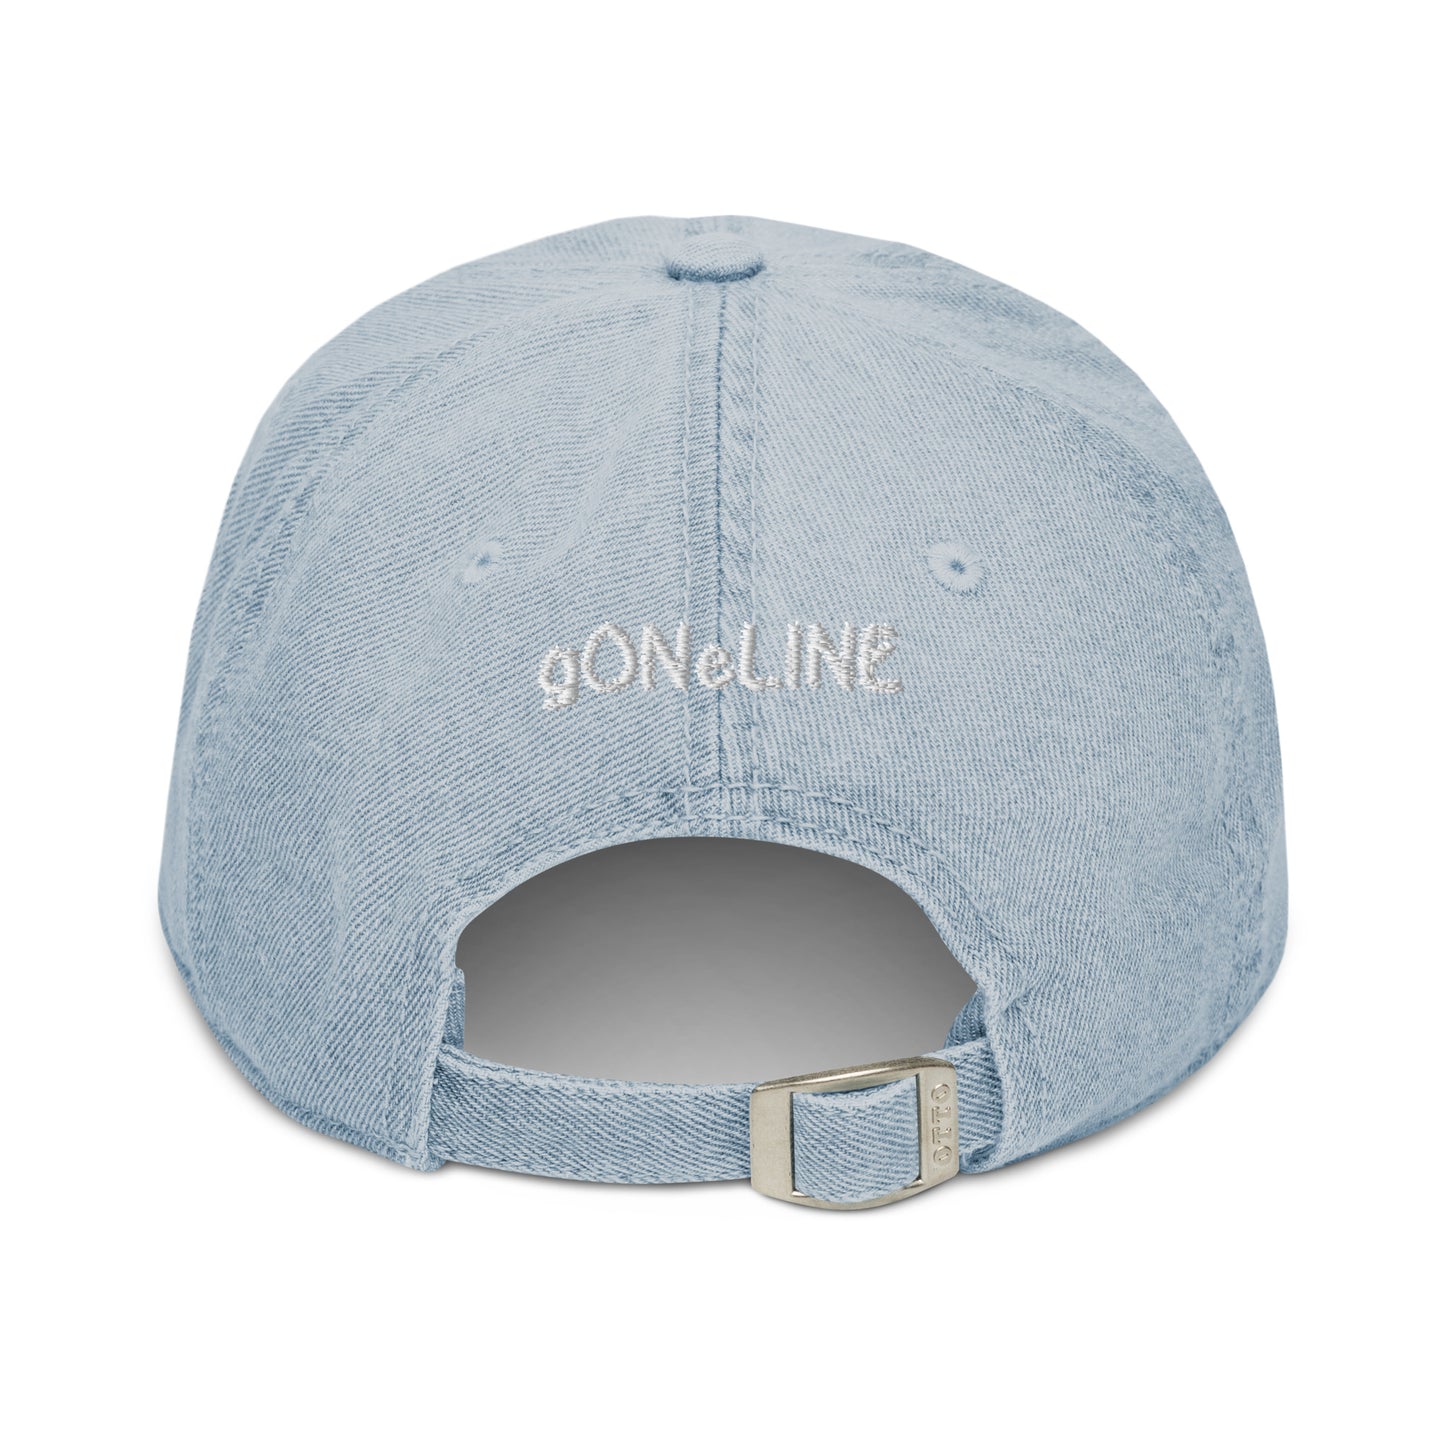 Uh-oh Embroidered Denim Dad Hat